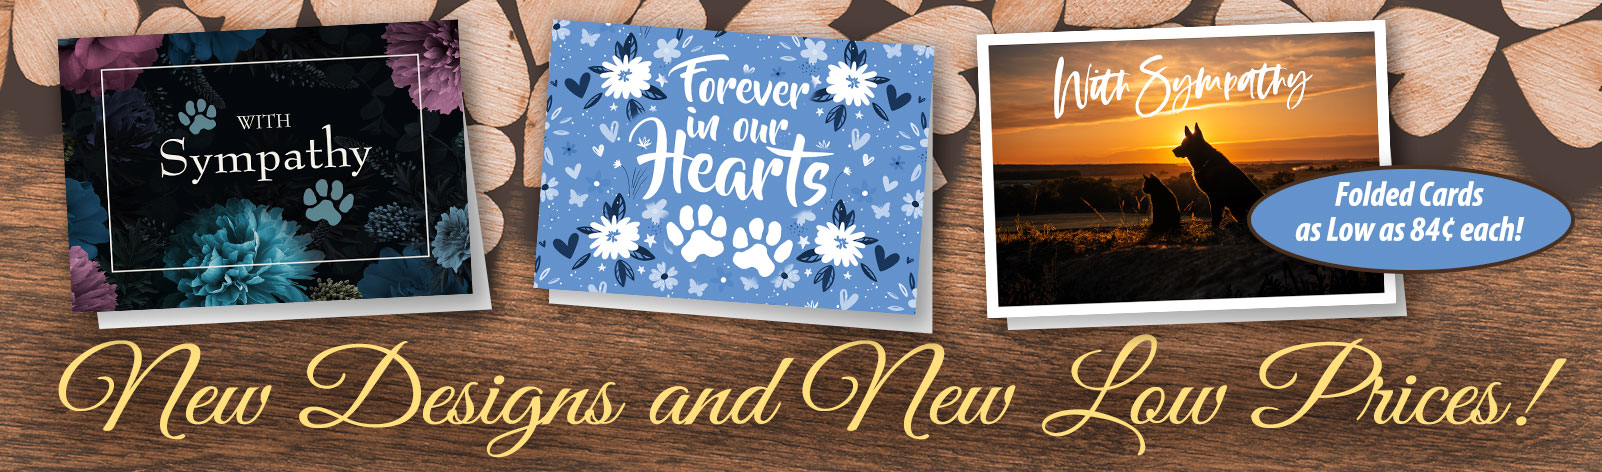 Keep your practice growing with personalized veterinary sympathy cards!